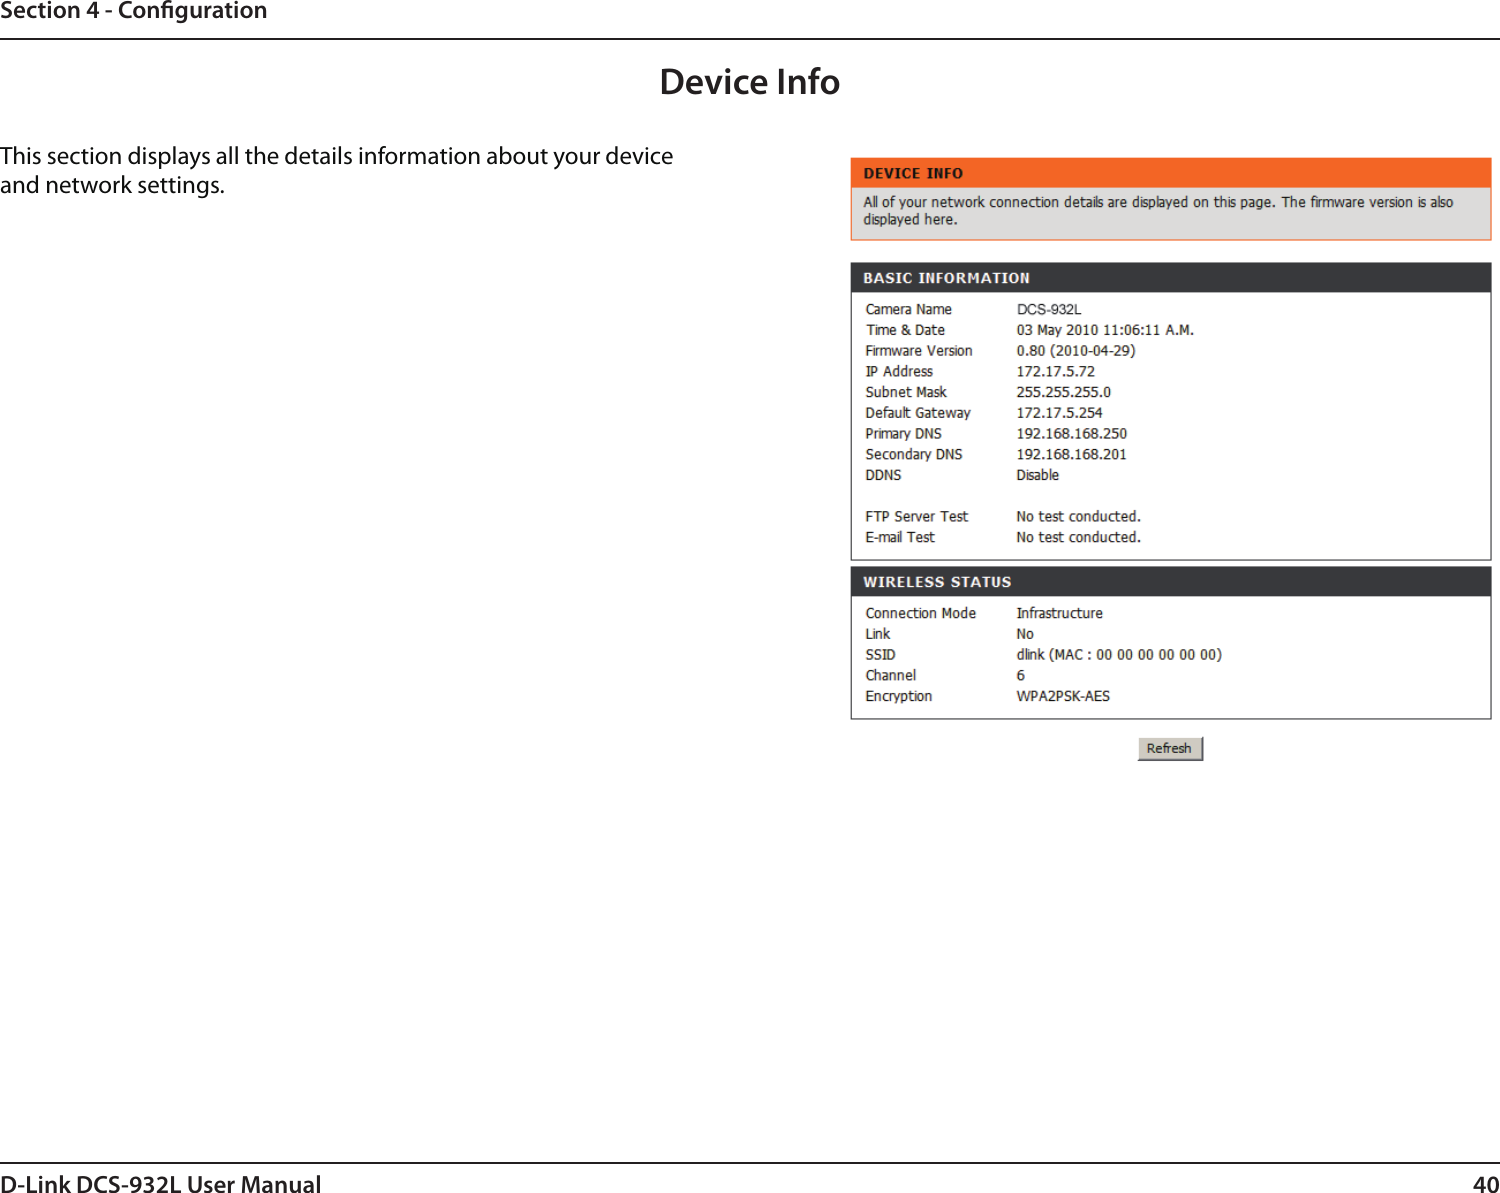 40D-Link DCS-932L User ManualSection 4 - CongurationDevice InfoThis section displays all the details information about your device and network settings.